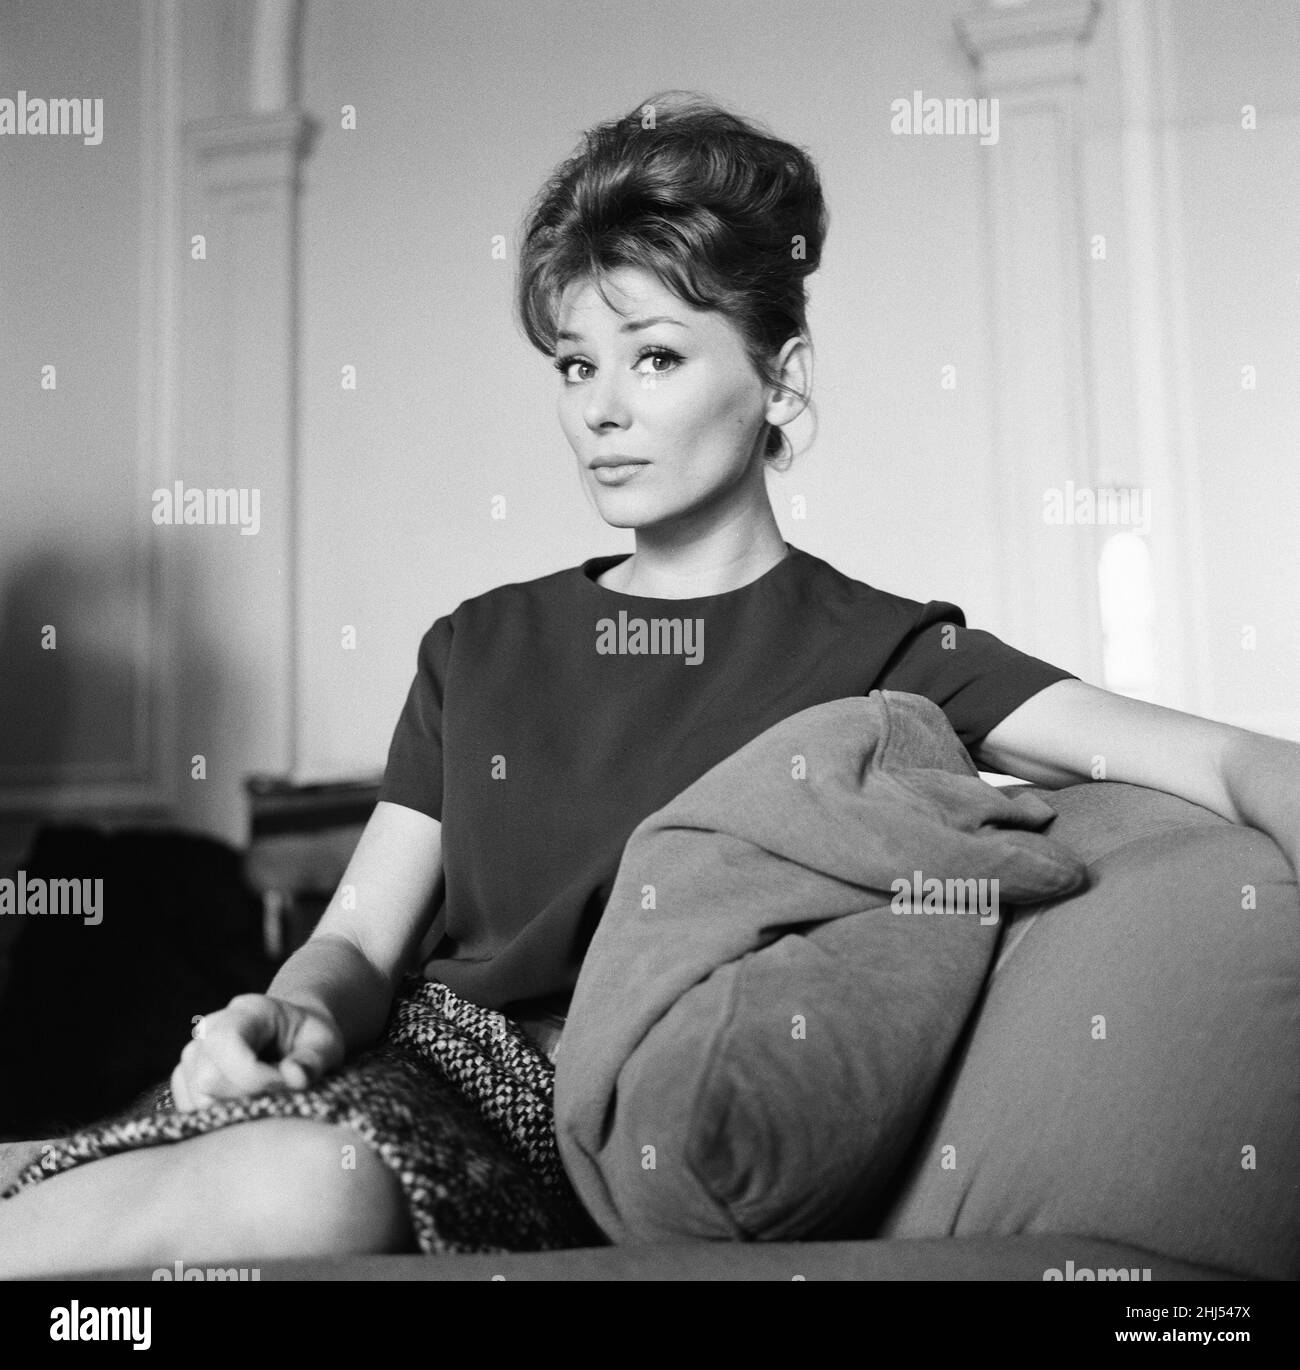 Irina Demick, french actress, in the UK for premiere of new film, The Longest Day, in which she stars as Janine Boitard, French Resistance, Caen, pictured at the Savoy Hotel, London, Monday 9th October 1961. The character Janine Boitard is based on real life resistance fighter Louise Boitard, known as Jeanine Boitard in the resistance. Stock Photo